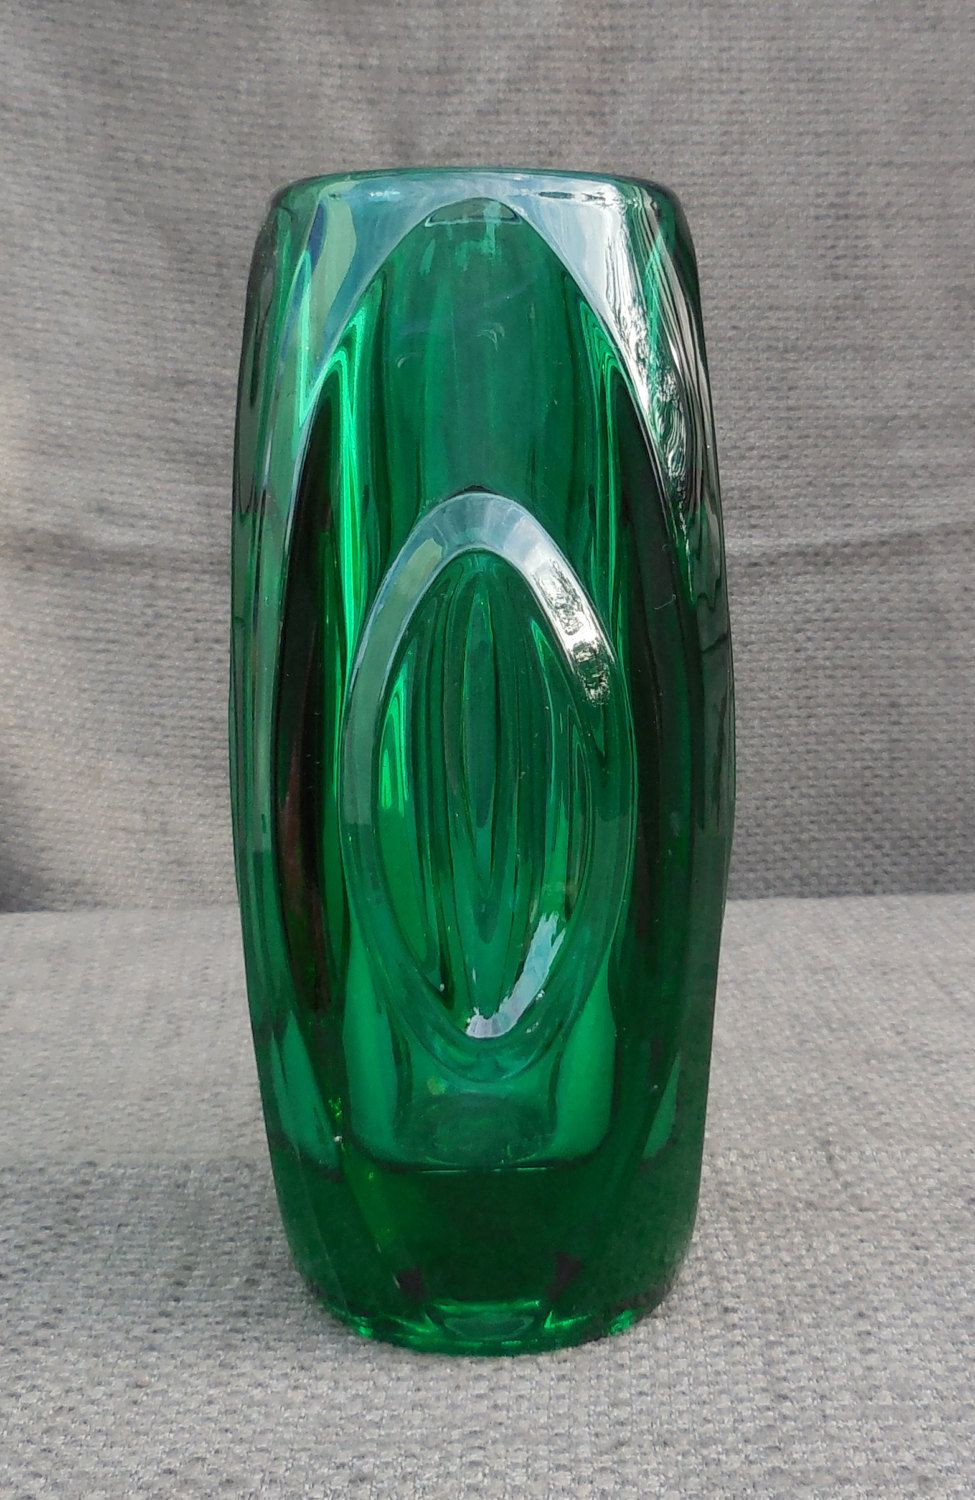 15 Stunning Fluted Glass Vase 2024 free download fluted glass vase of stunning 1950s vintage rosice czech lens green art glass vase by intended for stunning 1950s vintage rosice czech lens green art glass vase by rudolph schrotter